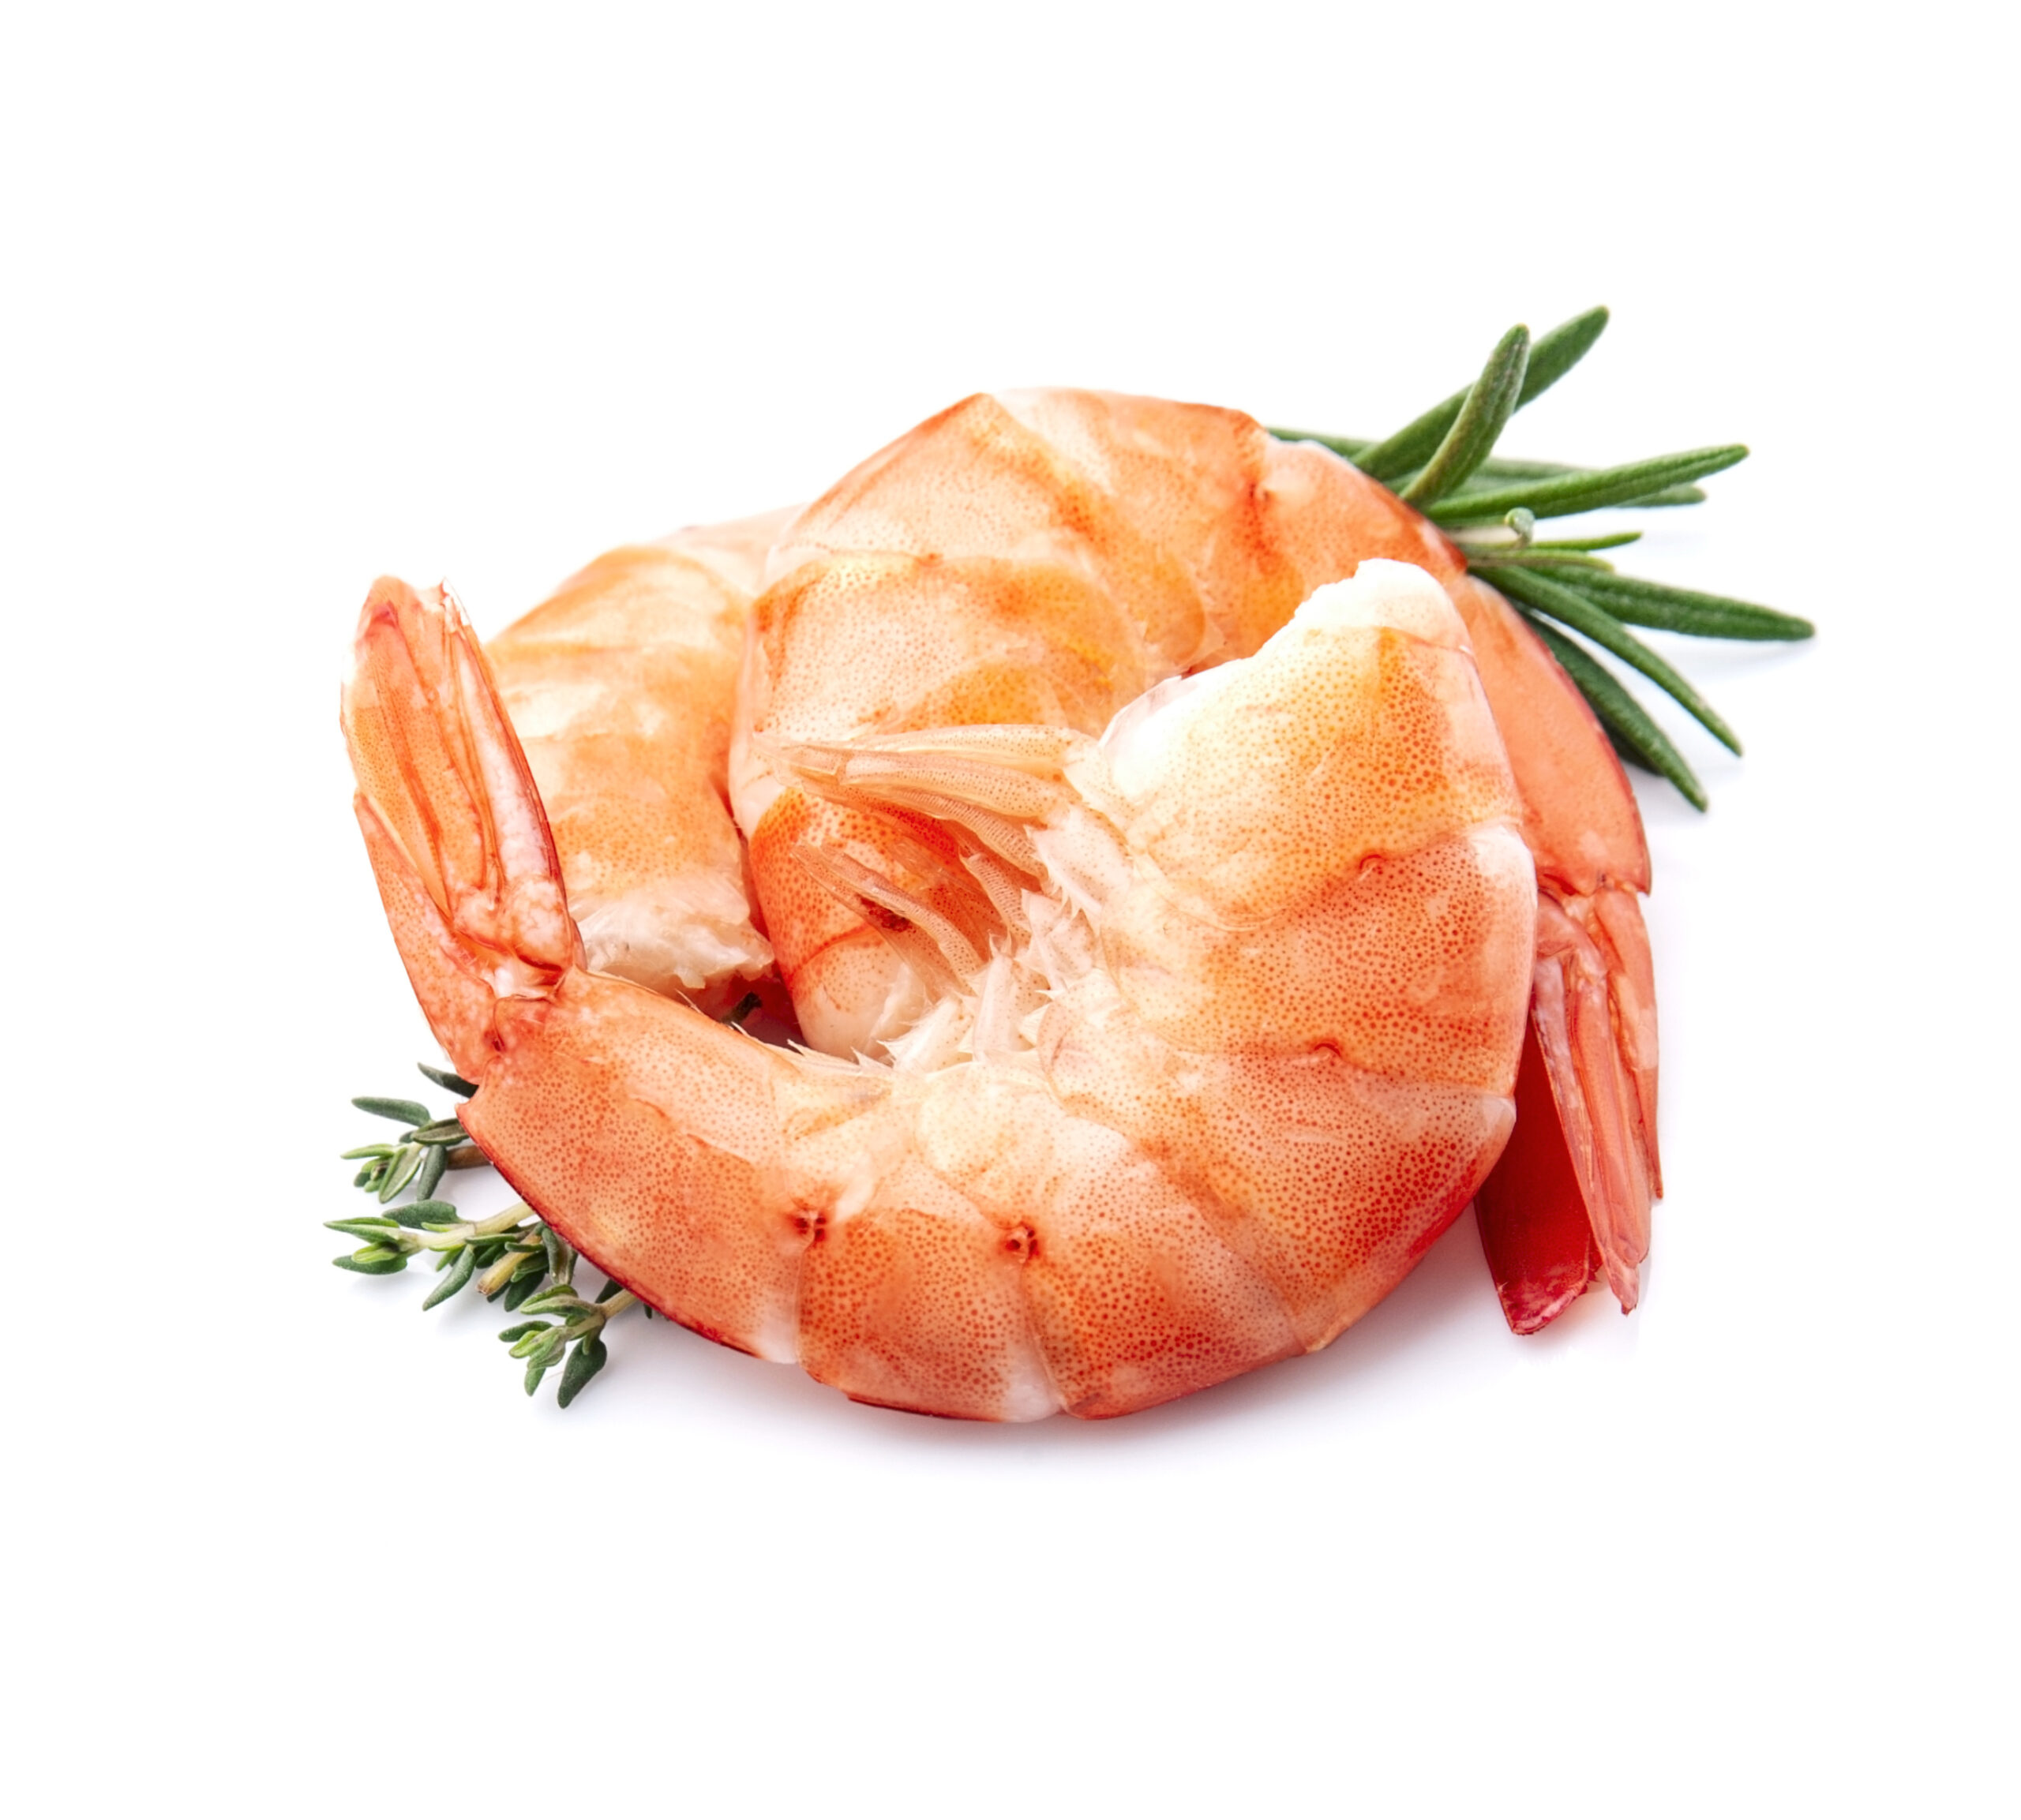 Shrimp with rosemary and thyme